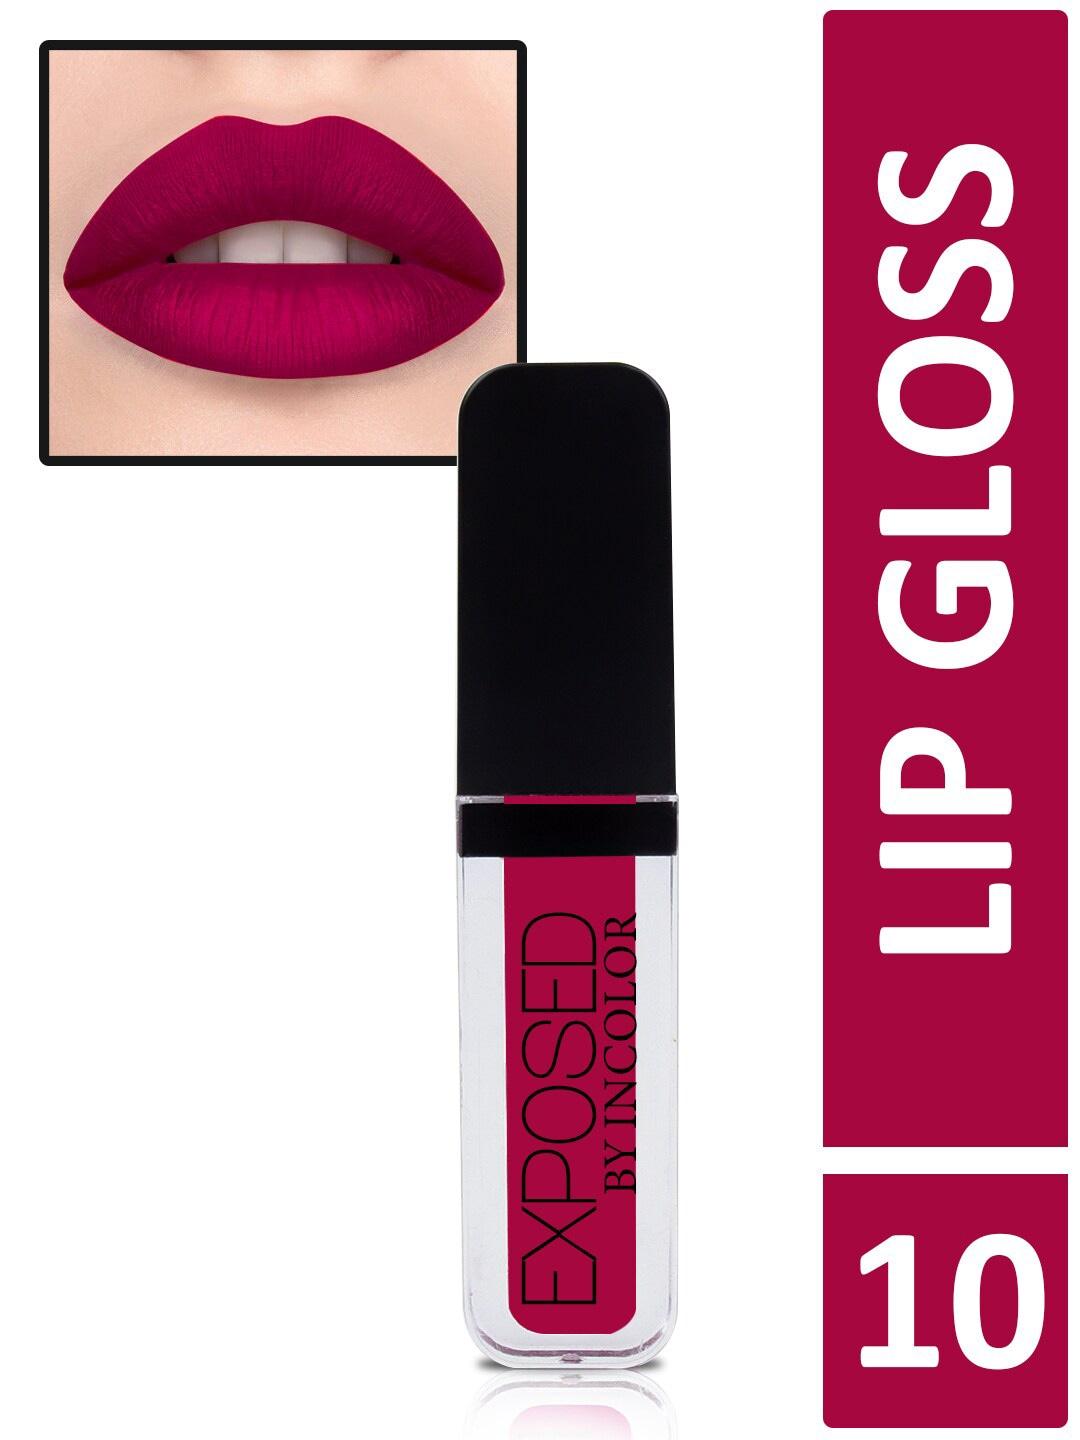 incolor-exposed-soft-matte-lip-gloss-10-6-ml